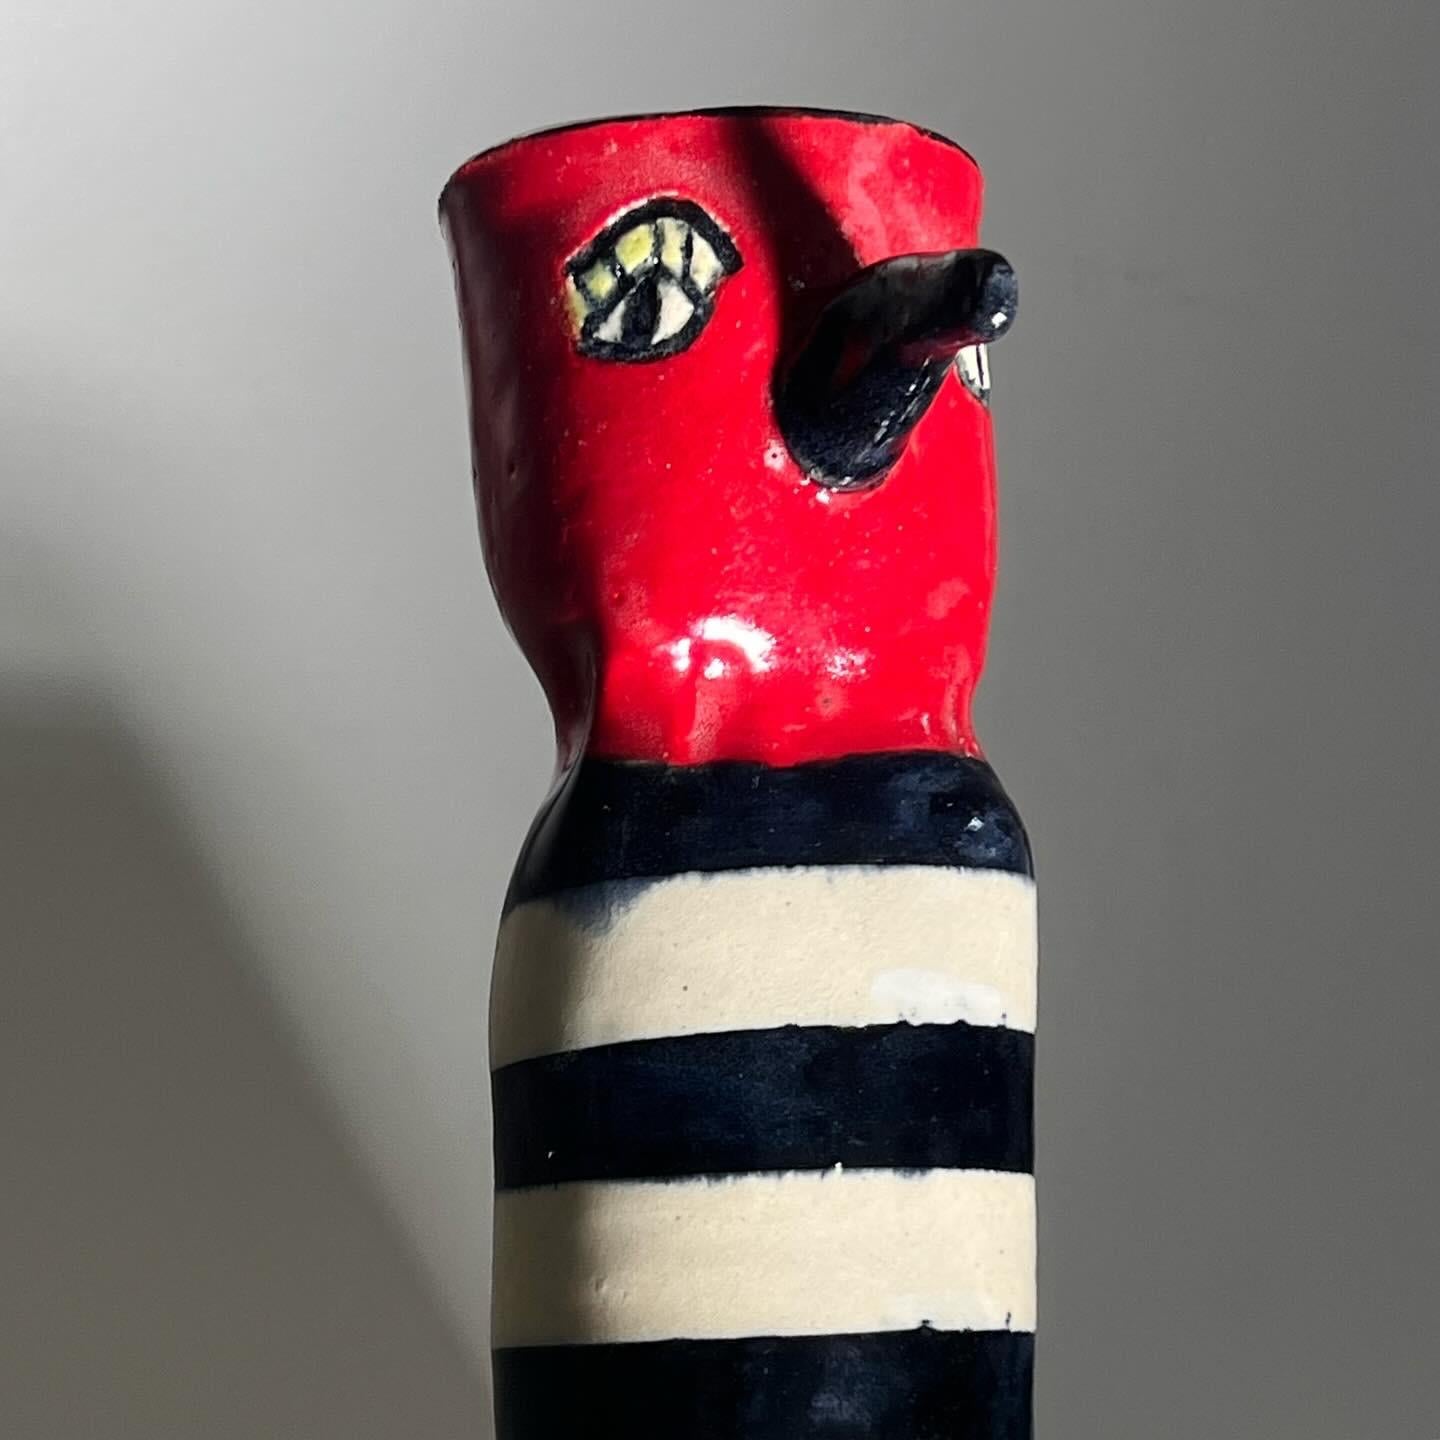 RARE BIRD: a ceramic bird vase with protruding beak, painted face, and striped body, signed by artist, 20th century. Tones of fire hydrant red, eggshell, and licorice. Immaculate. Pick up in LA or we ship worldwide. 
2.5” W x 3.5” D x 8.5” H 